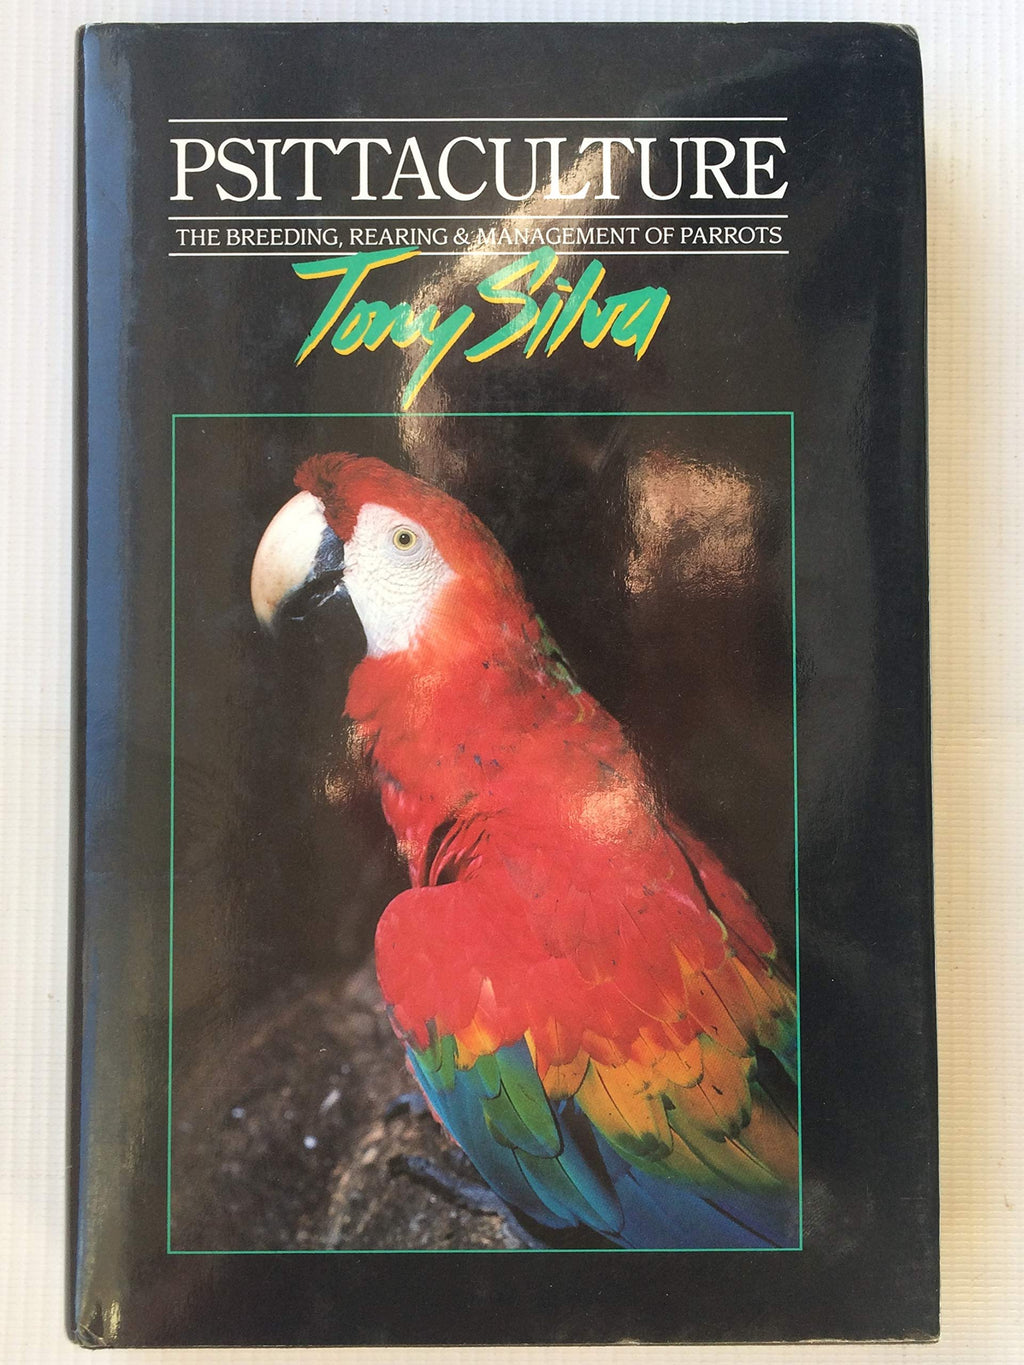 Psittaculture: Breeding, Rearing and Management of Parrots by Tony Silva